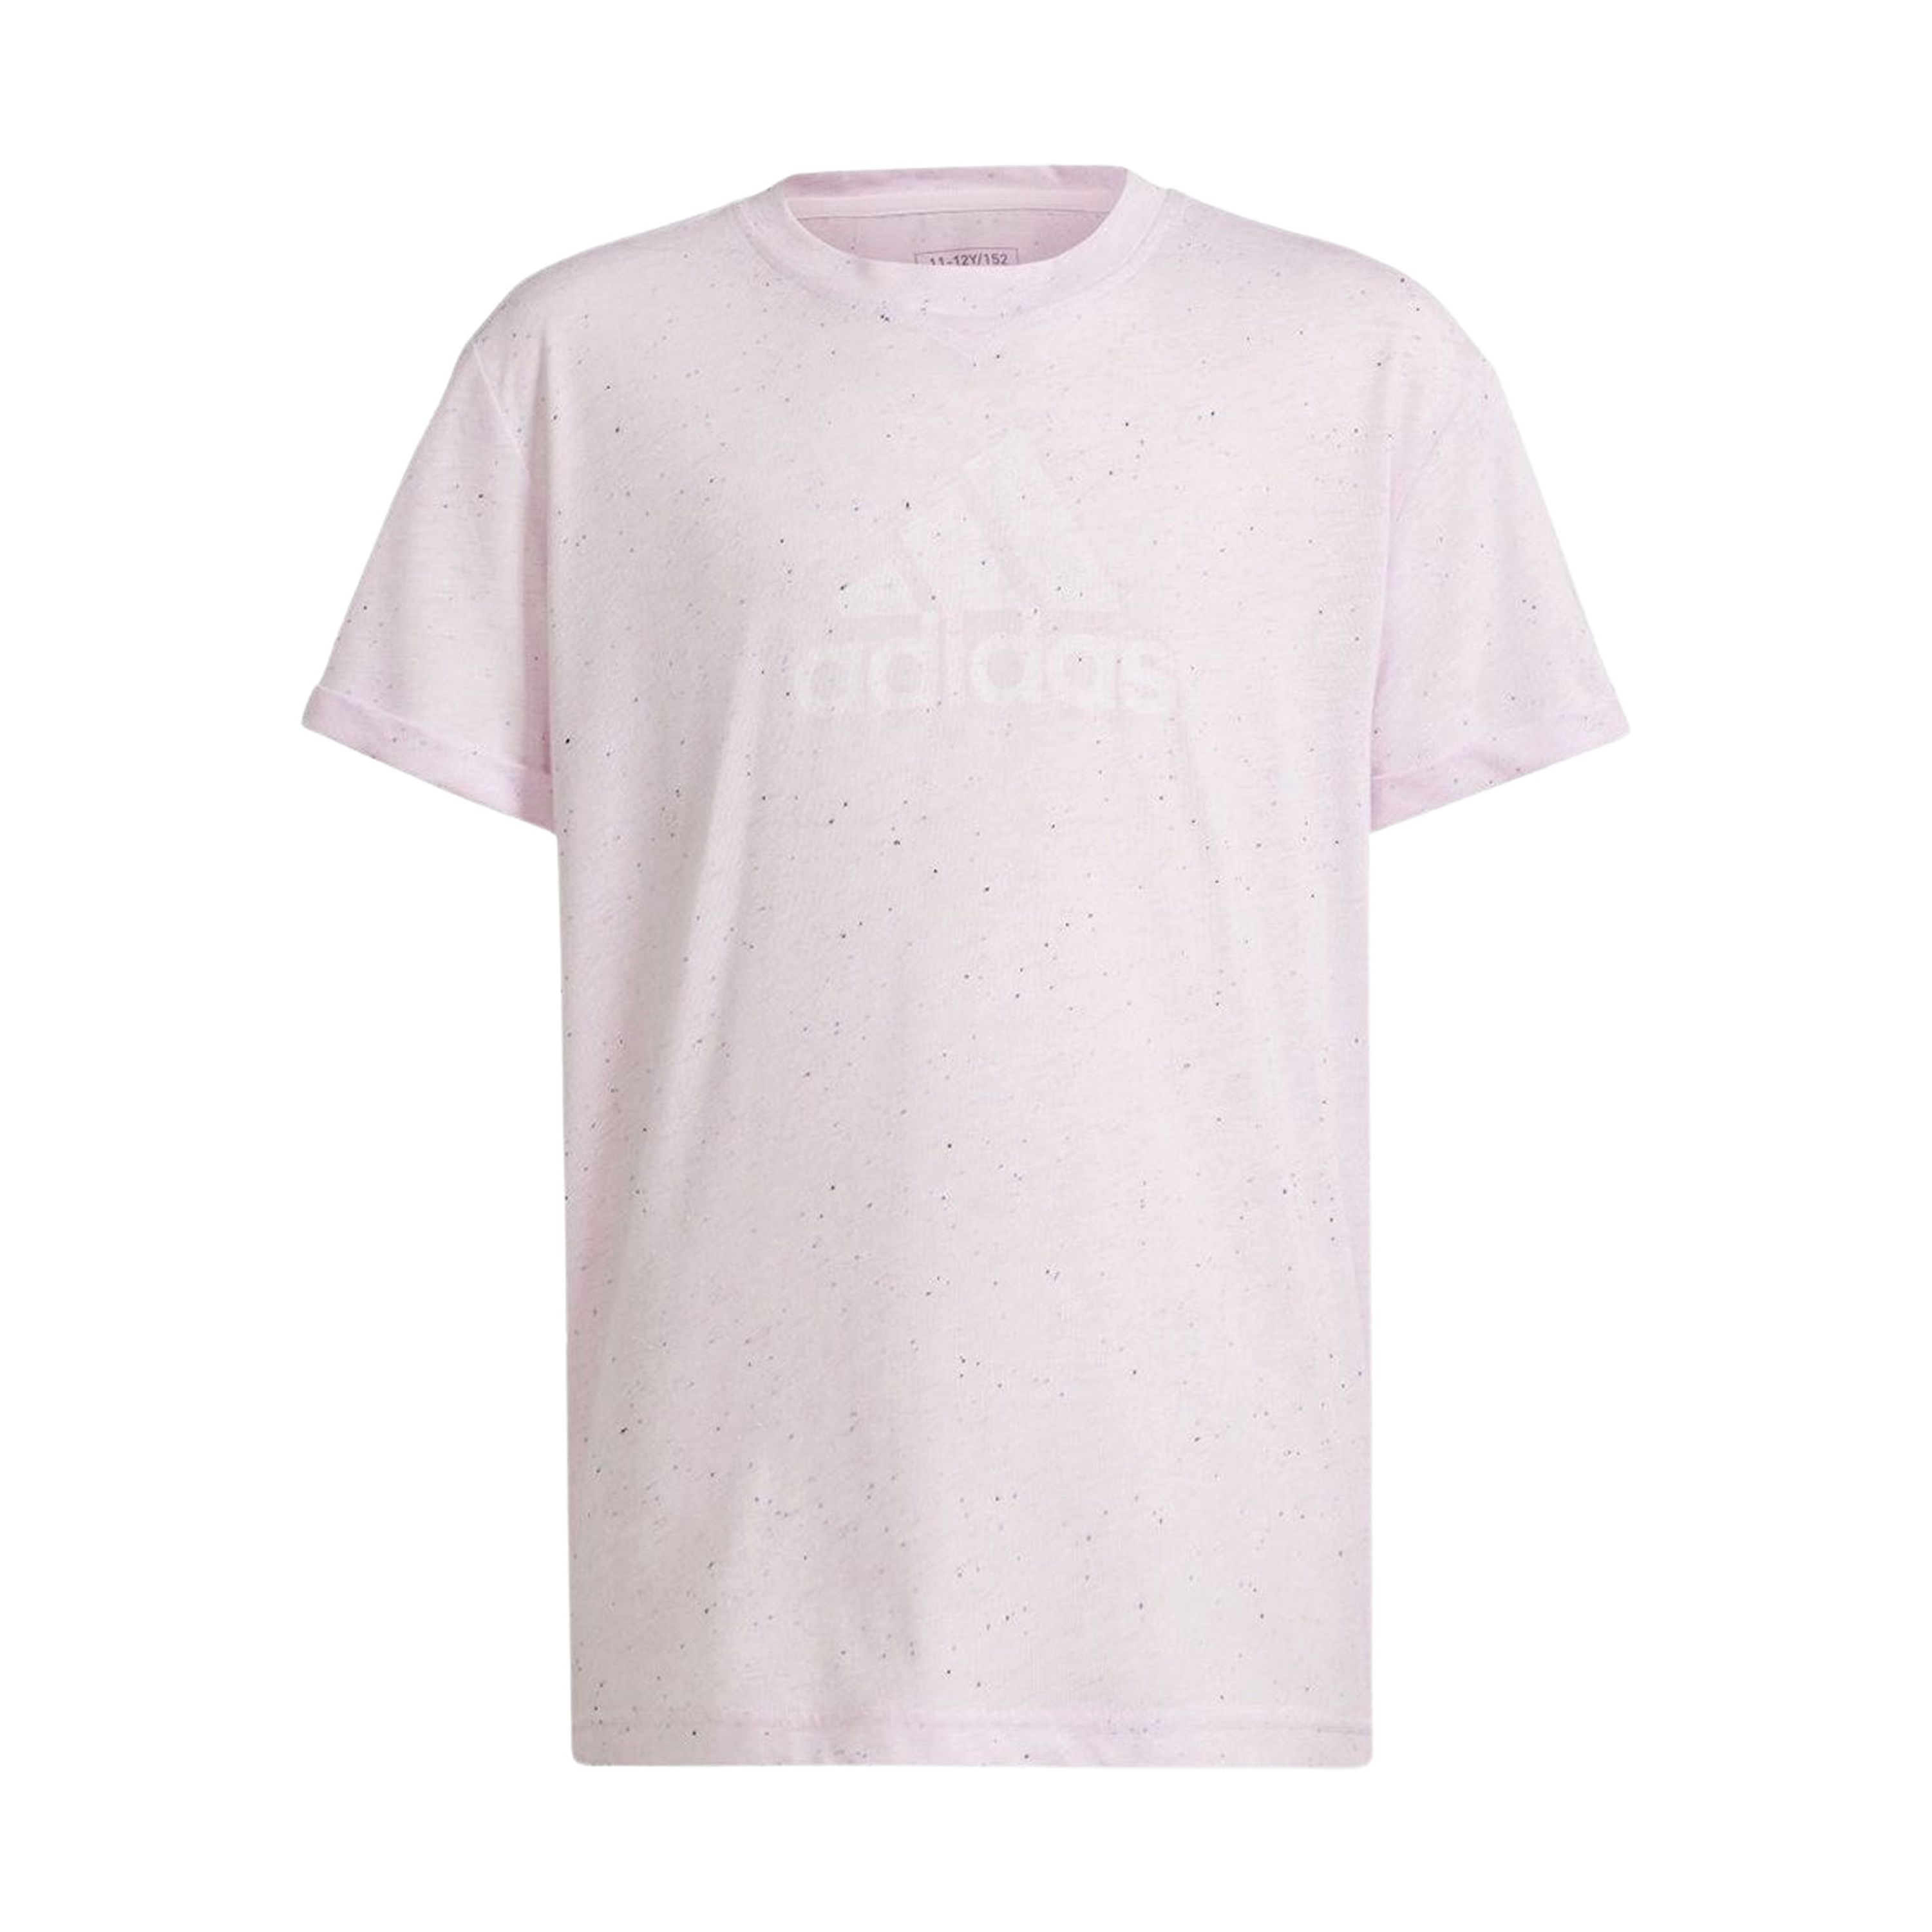 Adidas Sportswear T-shirt lichtroze Gerecycled polyester Ronde hals 170